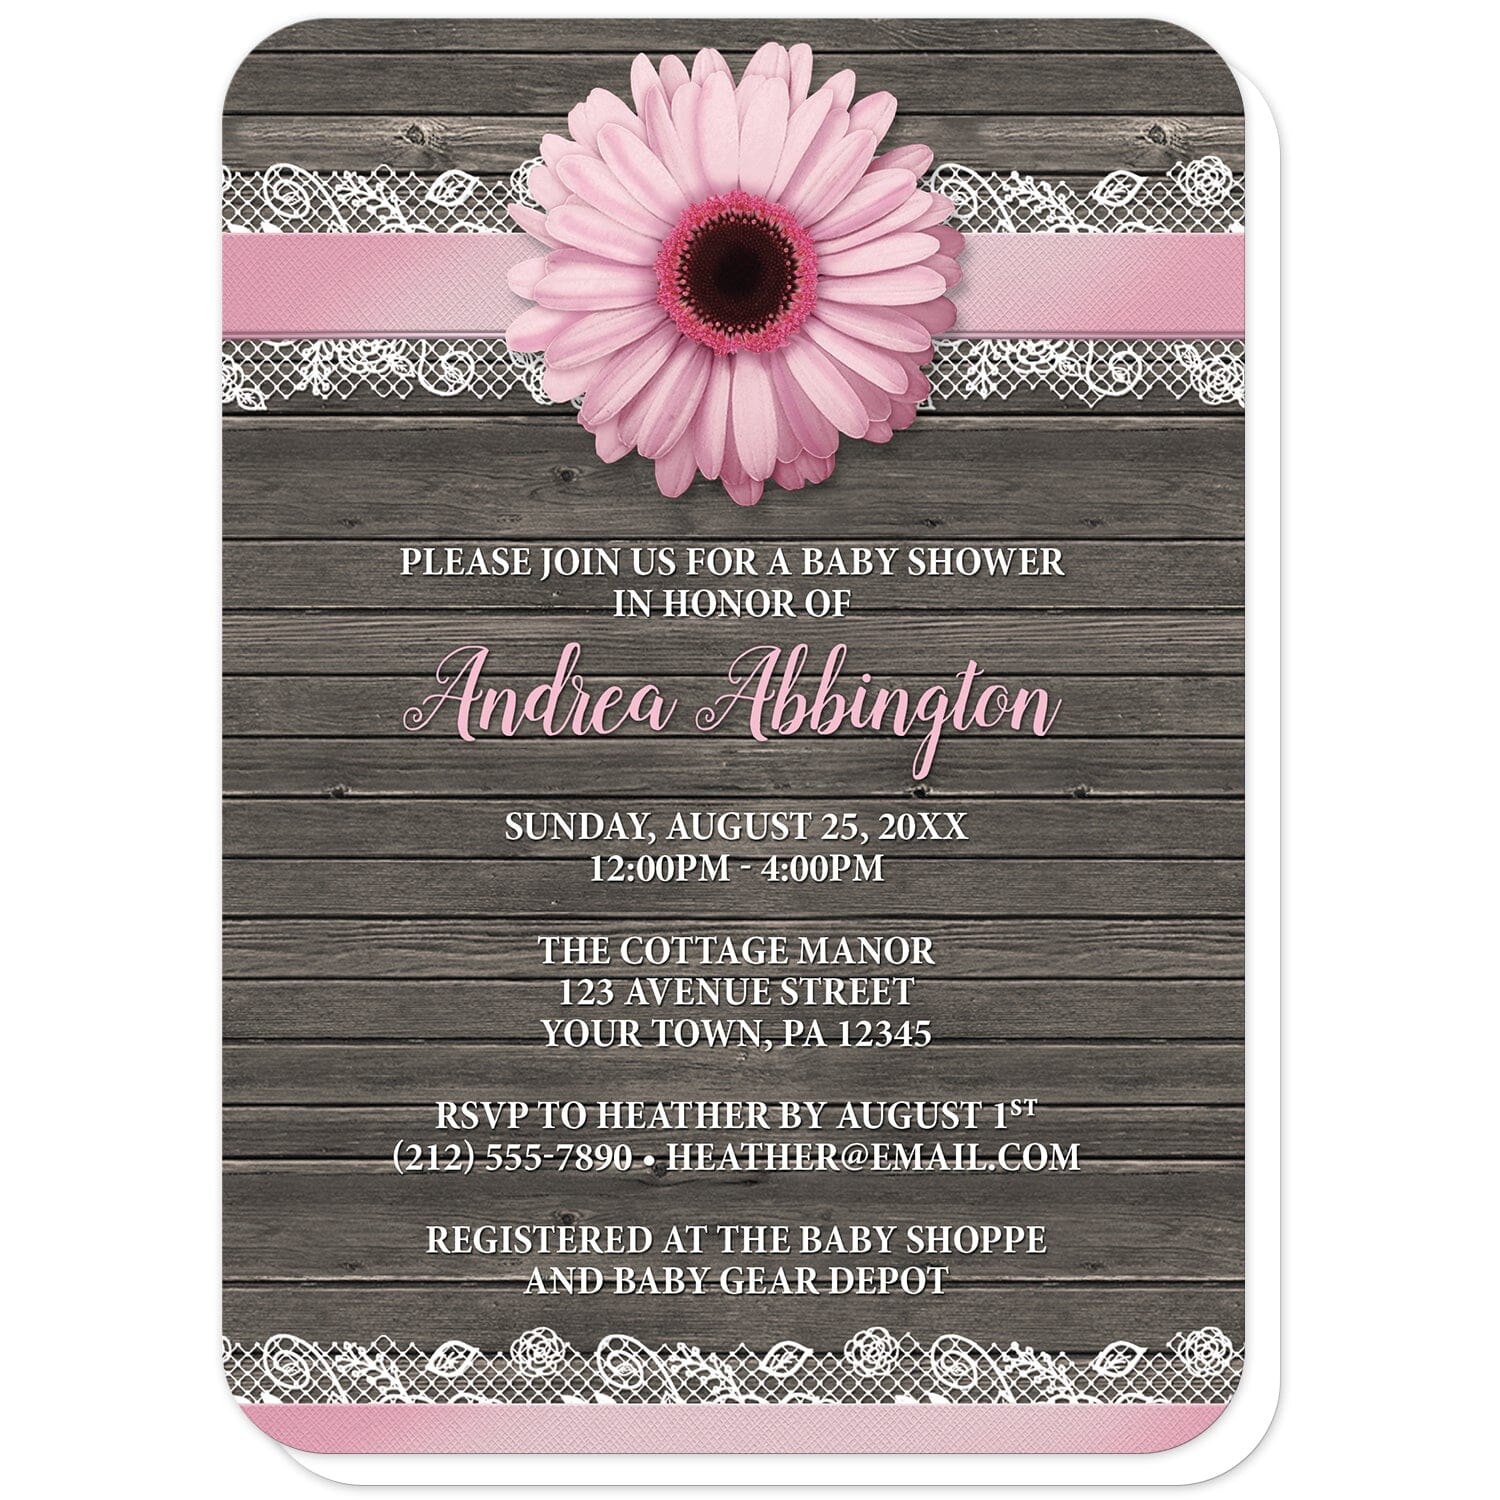 Pink Daisy Lace Rustic Wood Baby Shower Invitations (with rounded corners) at Artistically Invited. Southern-inspired pink daisy lace rustic wood baby shower invitations with a pink daisy flower image centered at the top on a pink and white lace ribbon illustration. Your personalized baby shower celebration details are custom printed in pink and white over a country brown wood background.